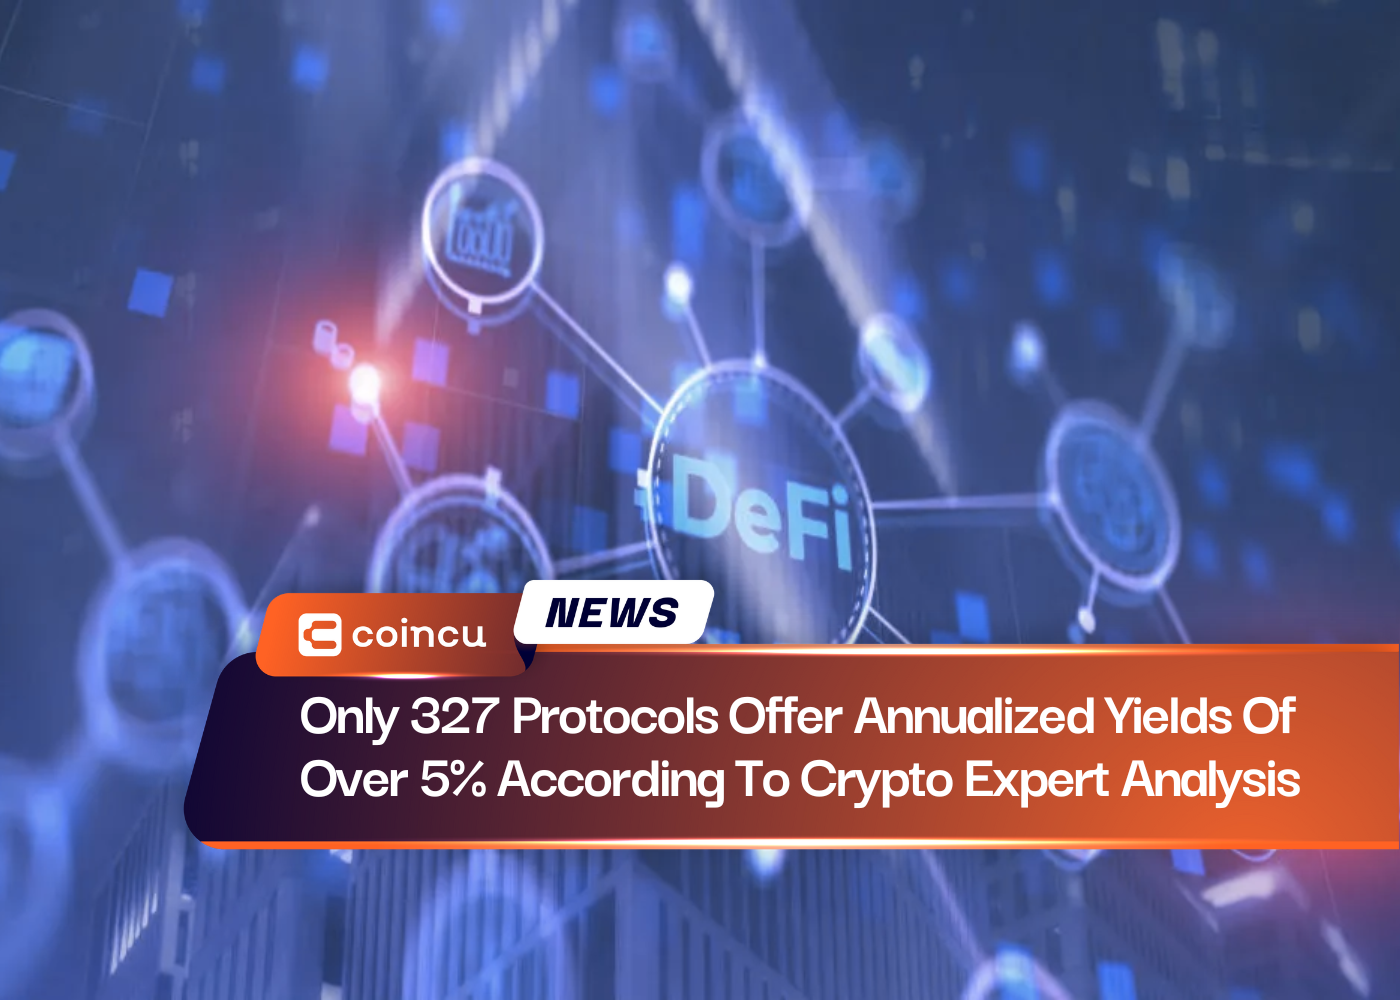 Only 327 Protocols Offer Annualized Yields Of Over 5% According To Crypto Expert Analysis